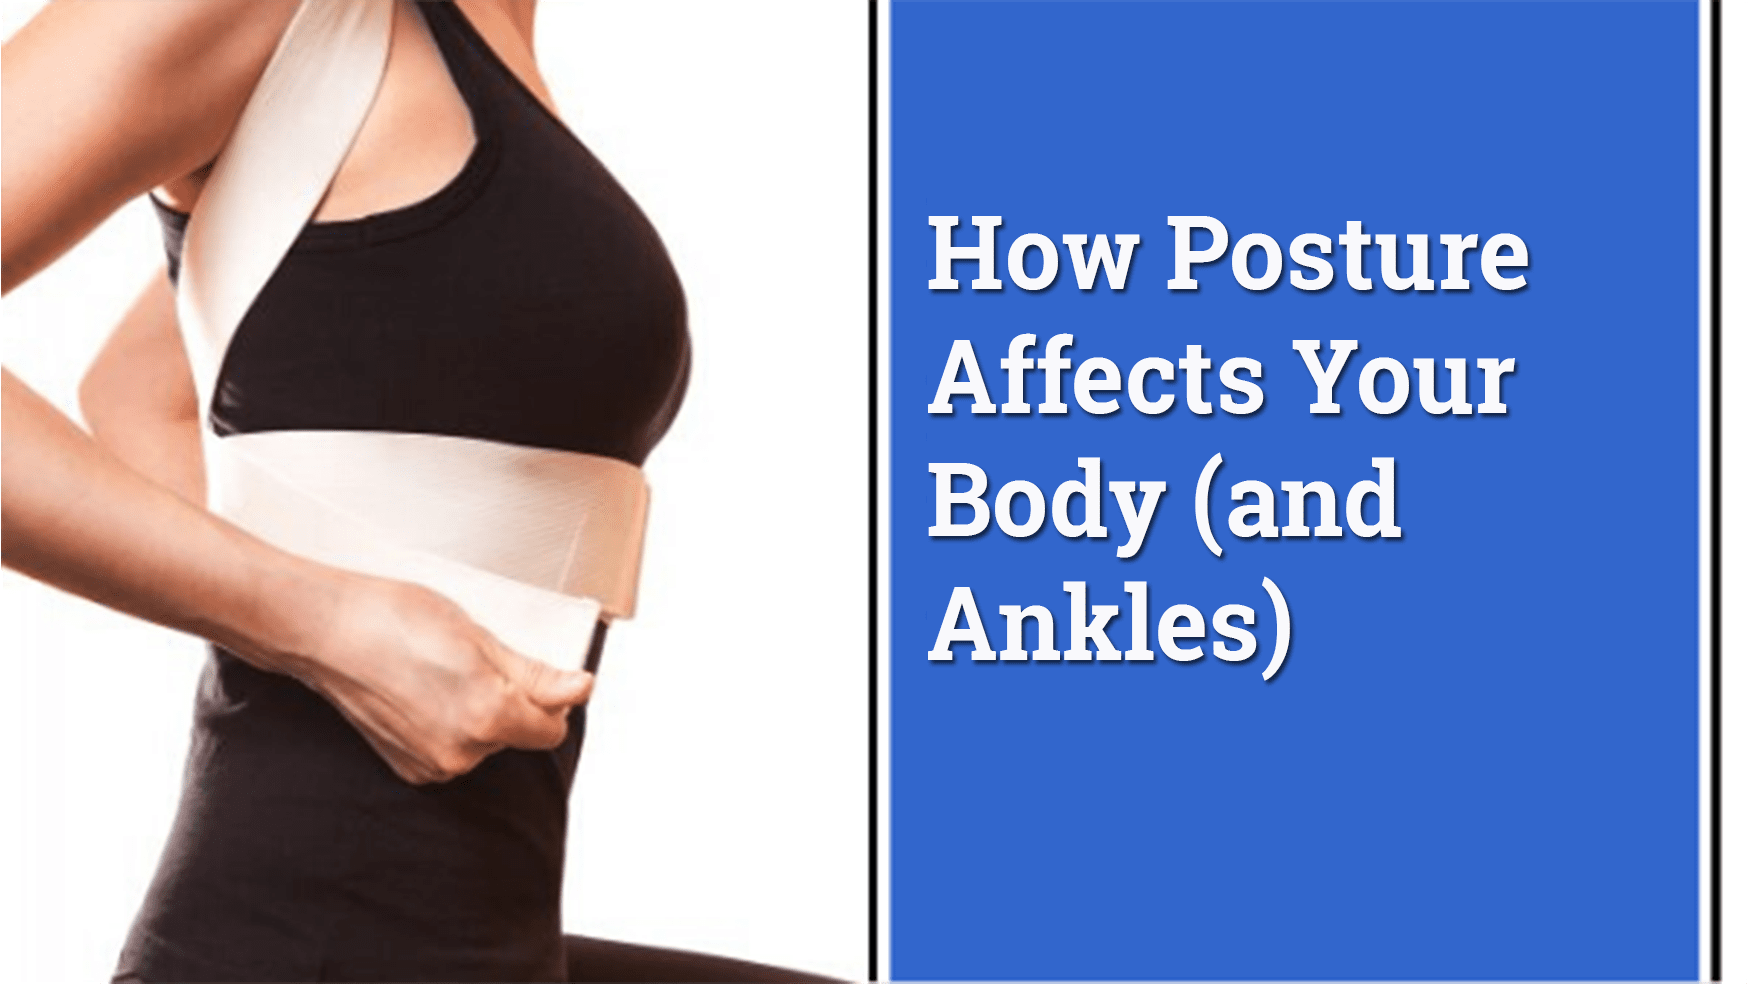 How Posture Affects Your Body (and Ankles)